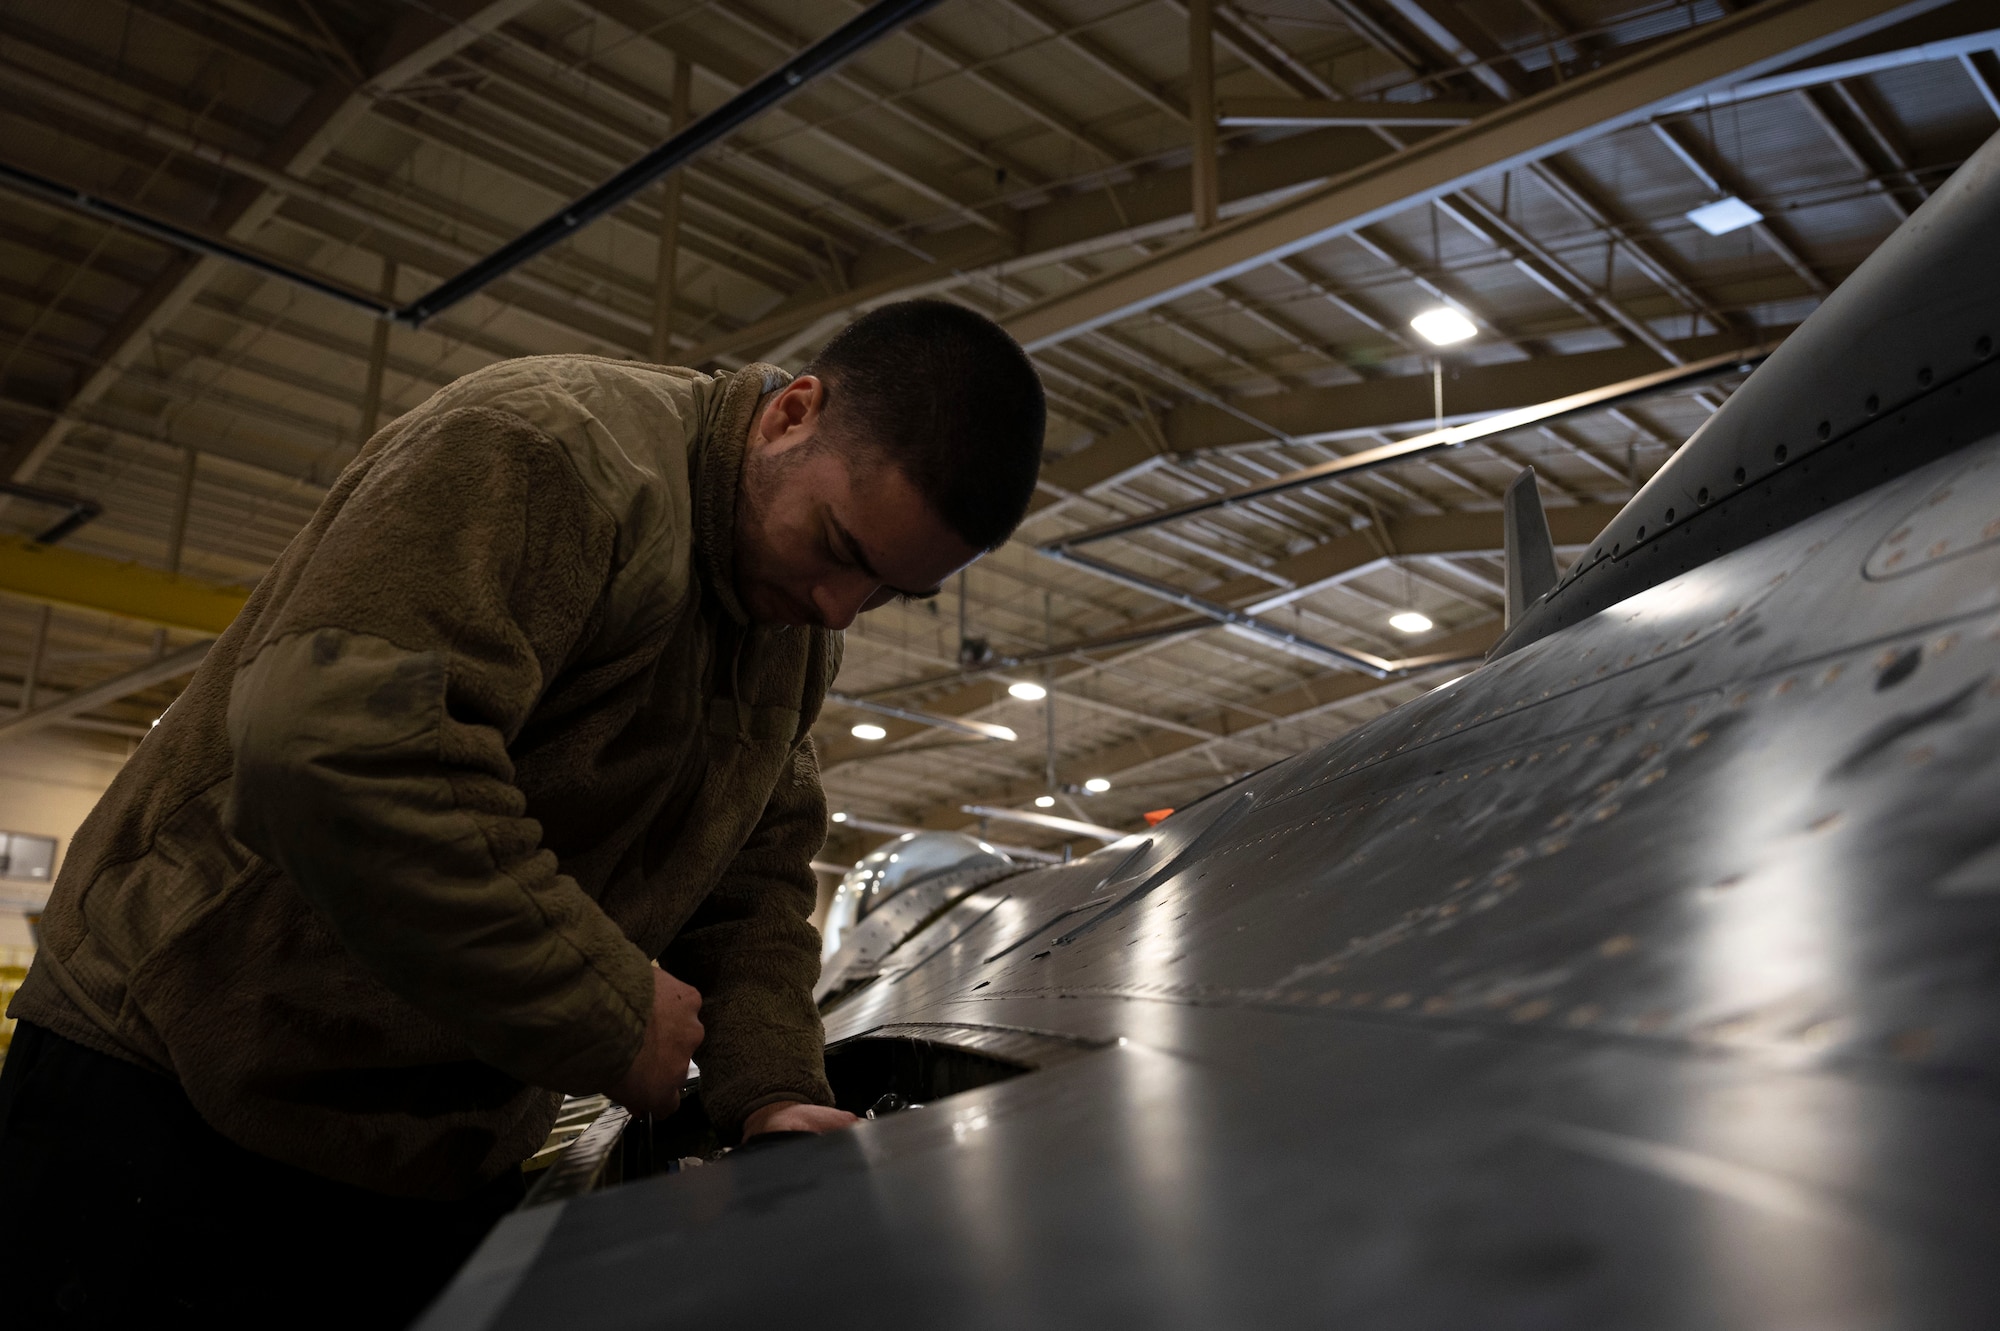 U.S. Air Force Senior Airman Andres Medrano, 49th Equipment Maintenance Squadron aircraft inspection section journeyman, performs an inspection of a wing component on an F-16 Viper at Holloman Air Force Base, New Mexico, Dec. 1, 2023. Phase inspections are performed with high attention to detail to ensure all F-16s are ready for operational use. (U.S. Air Force photo by Airman 1st Class Isaiah Pedrazzini)